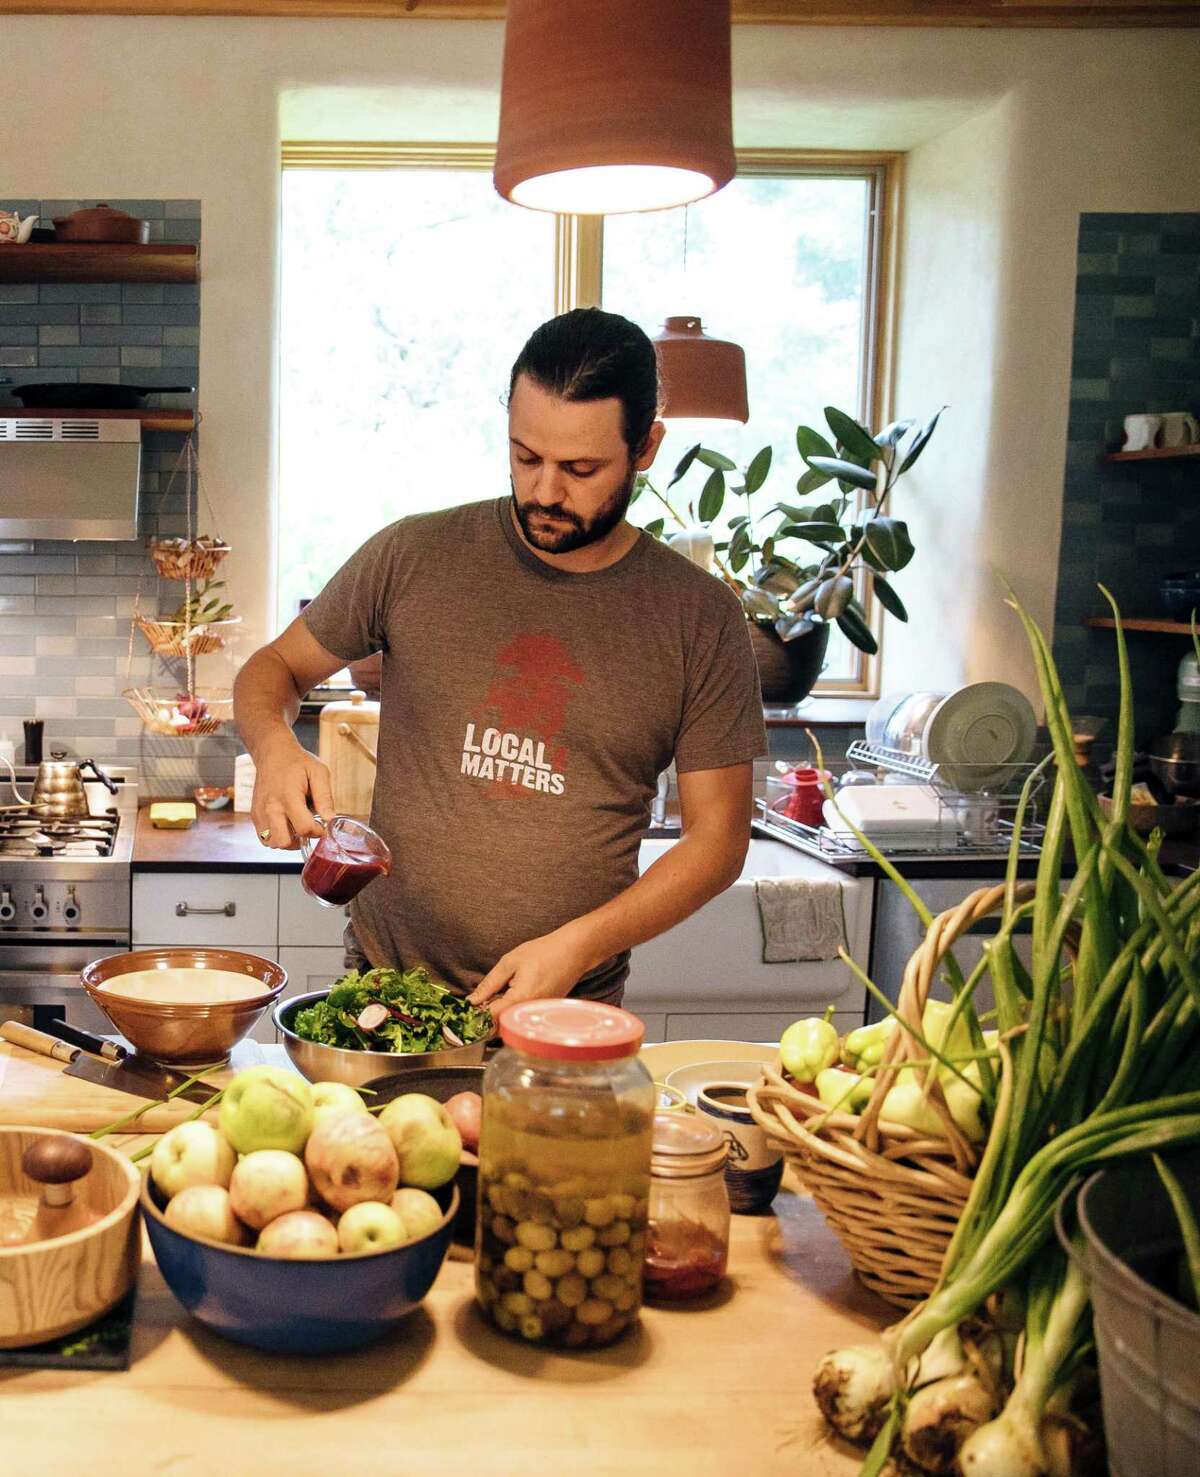 Lowell Sheldon plans to open a Georgian-inspired restaurant and wine bar called Piala in Sebastopol, but he’s facing resistance.